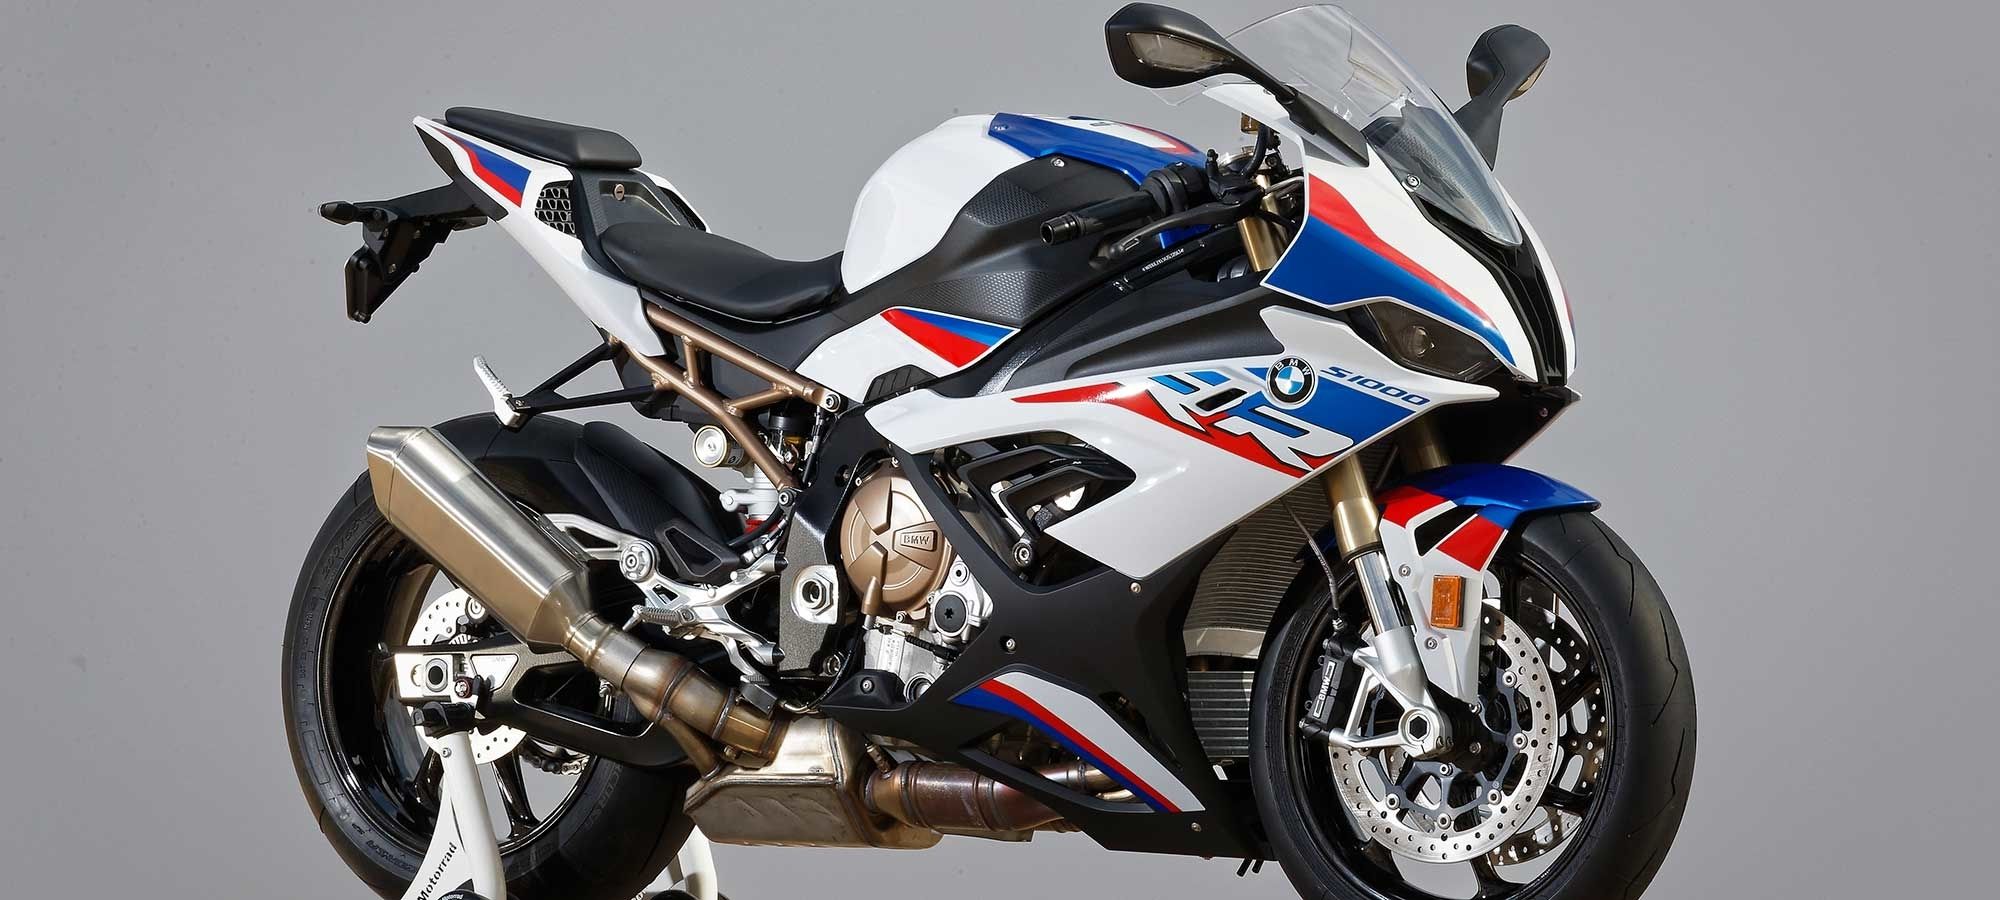 82 New 2020 Bmw S1000r And Images - Bmw S1000rr 2019 Prix , HD Wallpaper & Backgrounds